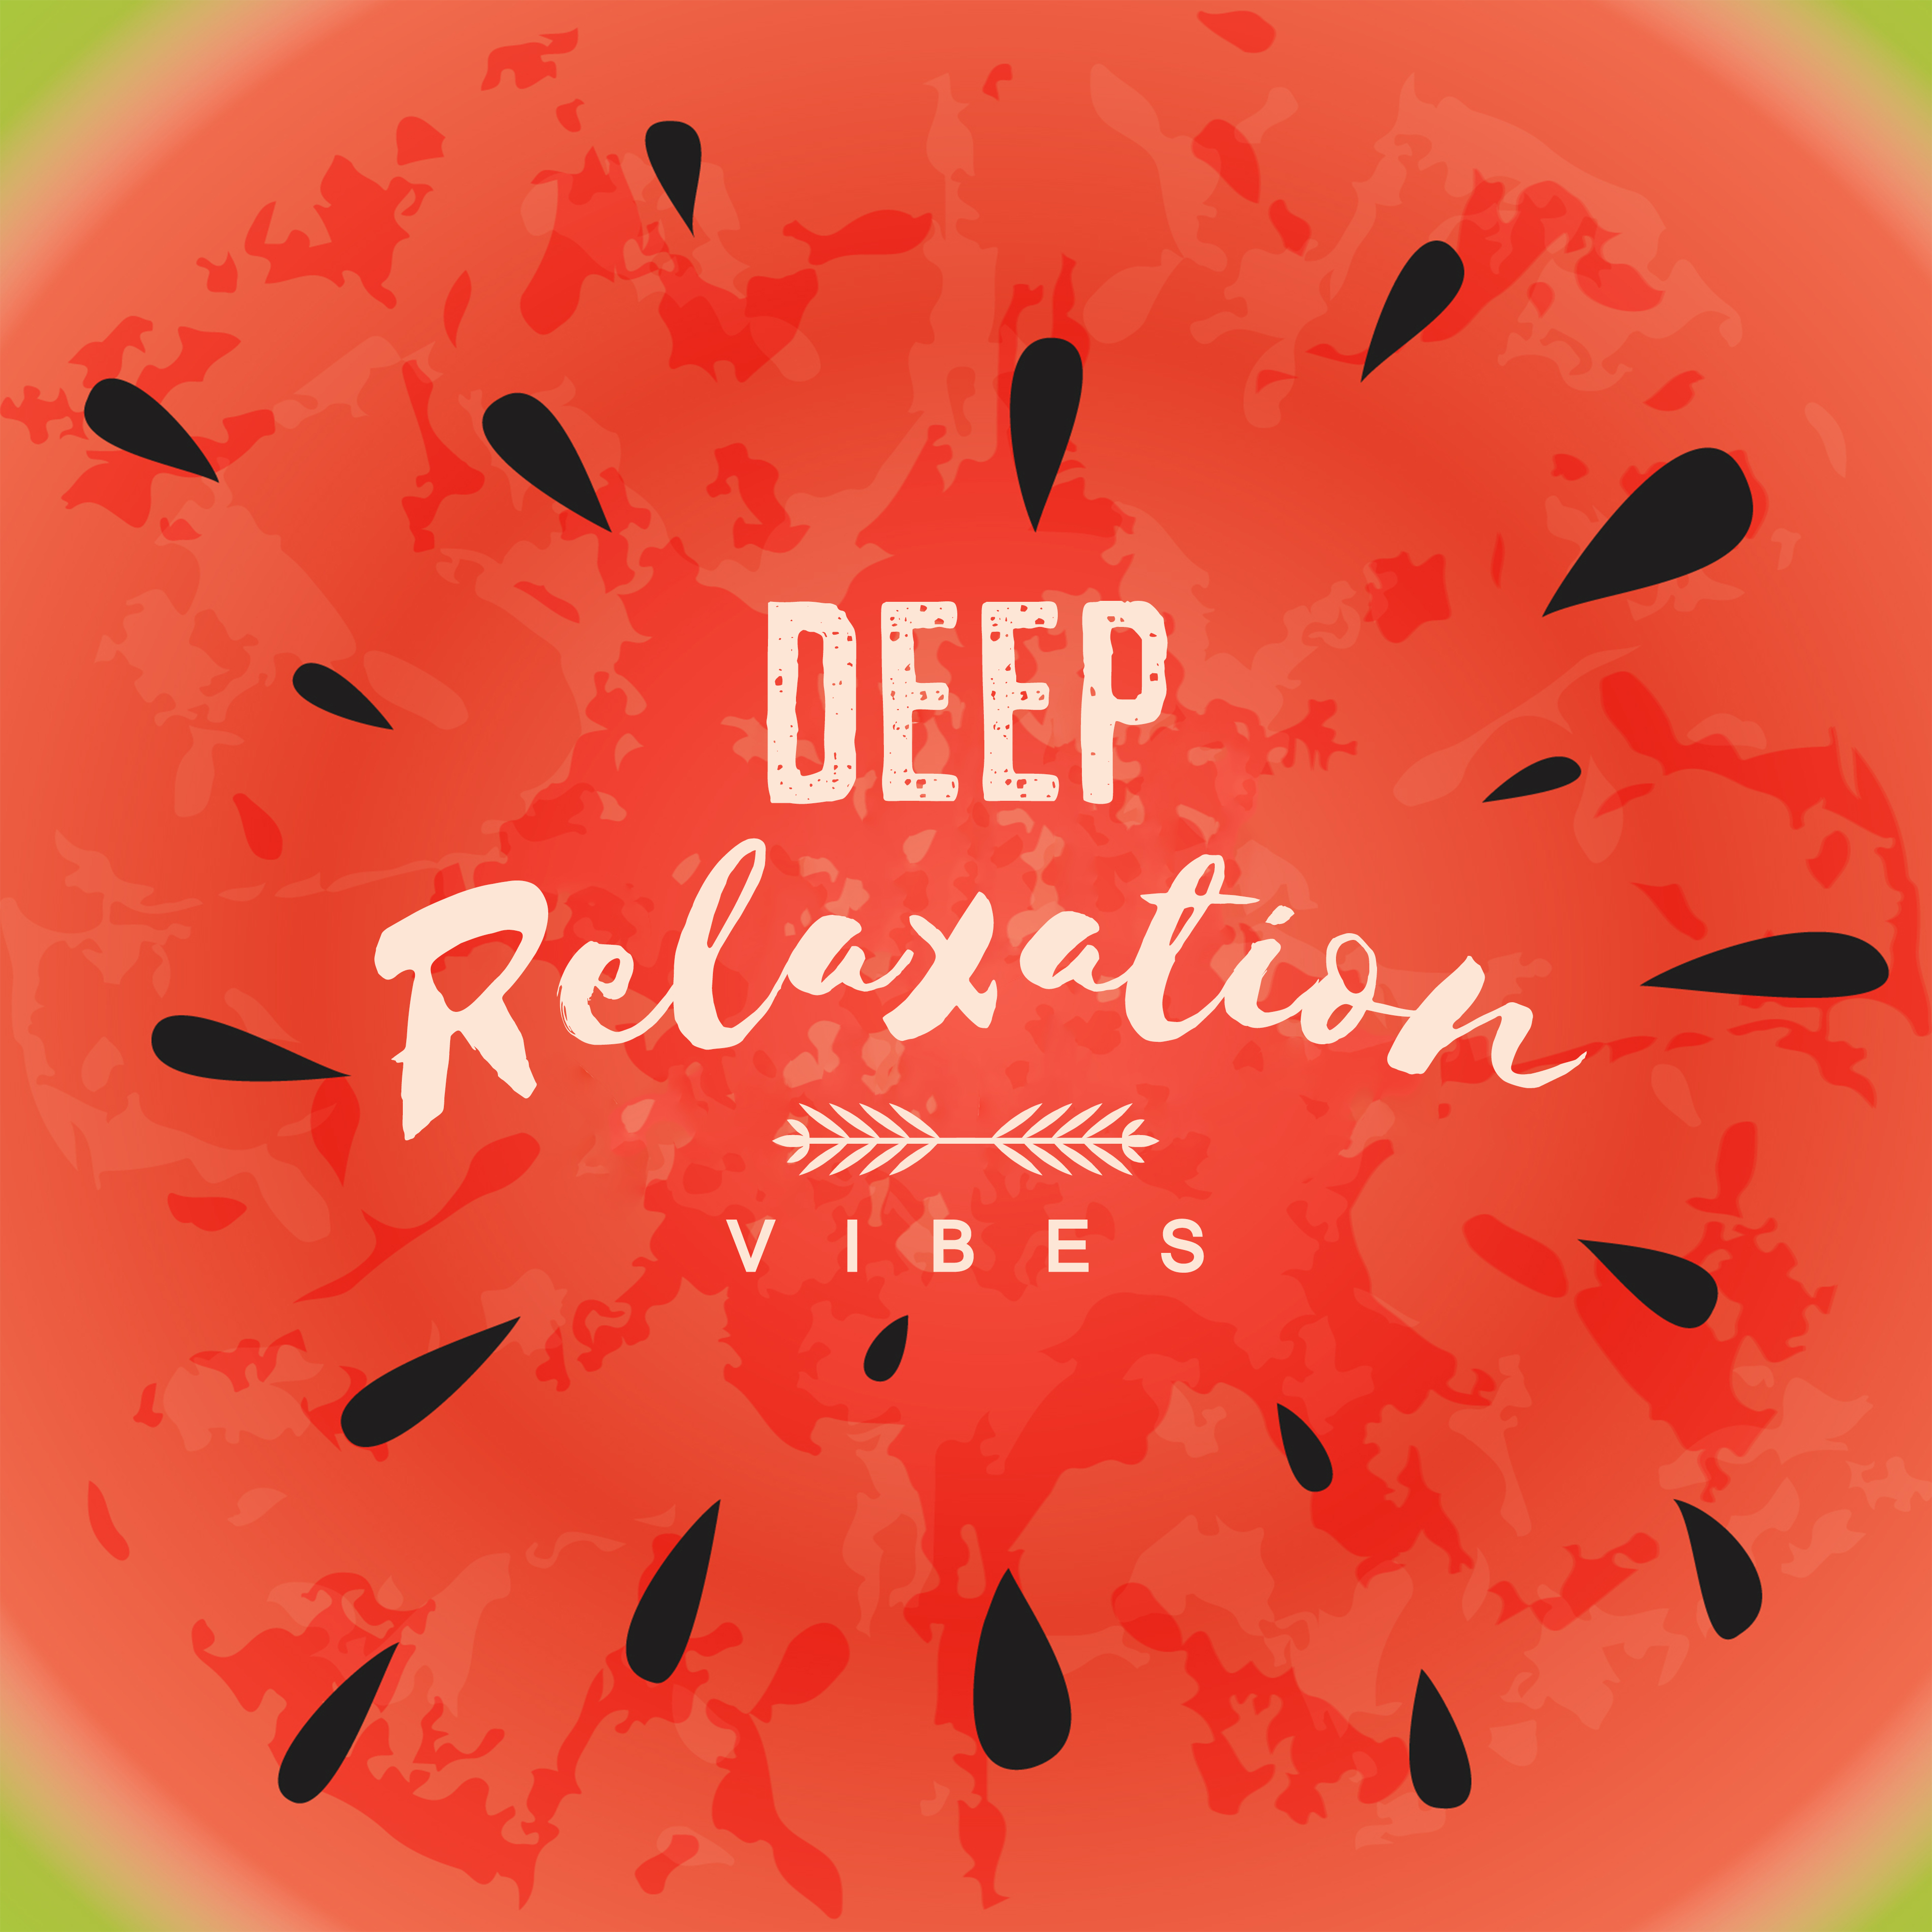 Deep Relaxation Vibes